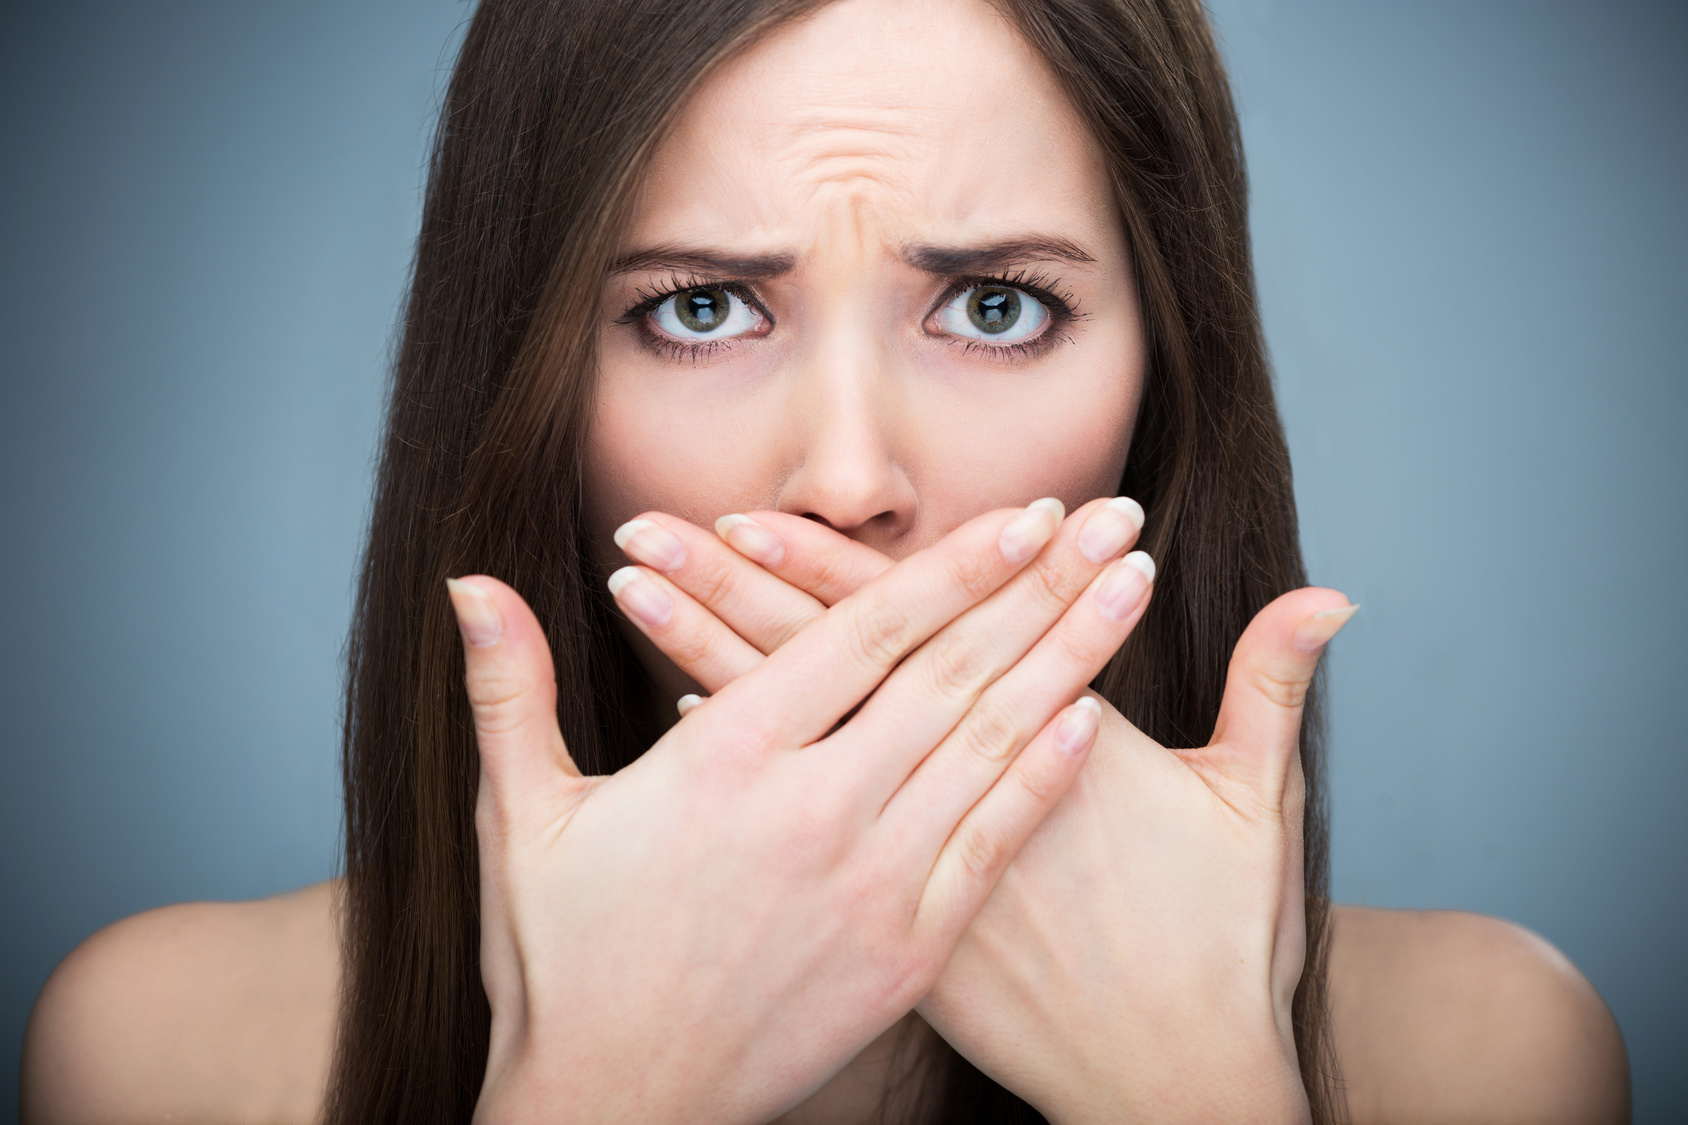 Bad Breath Doesn’t Have to Ruin Your Day